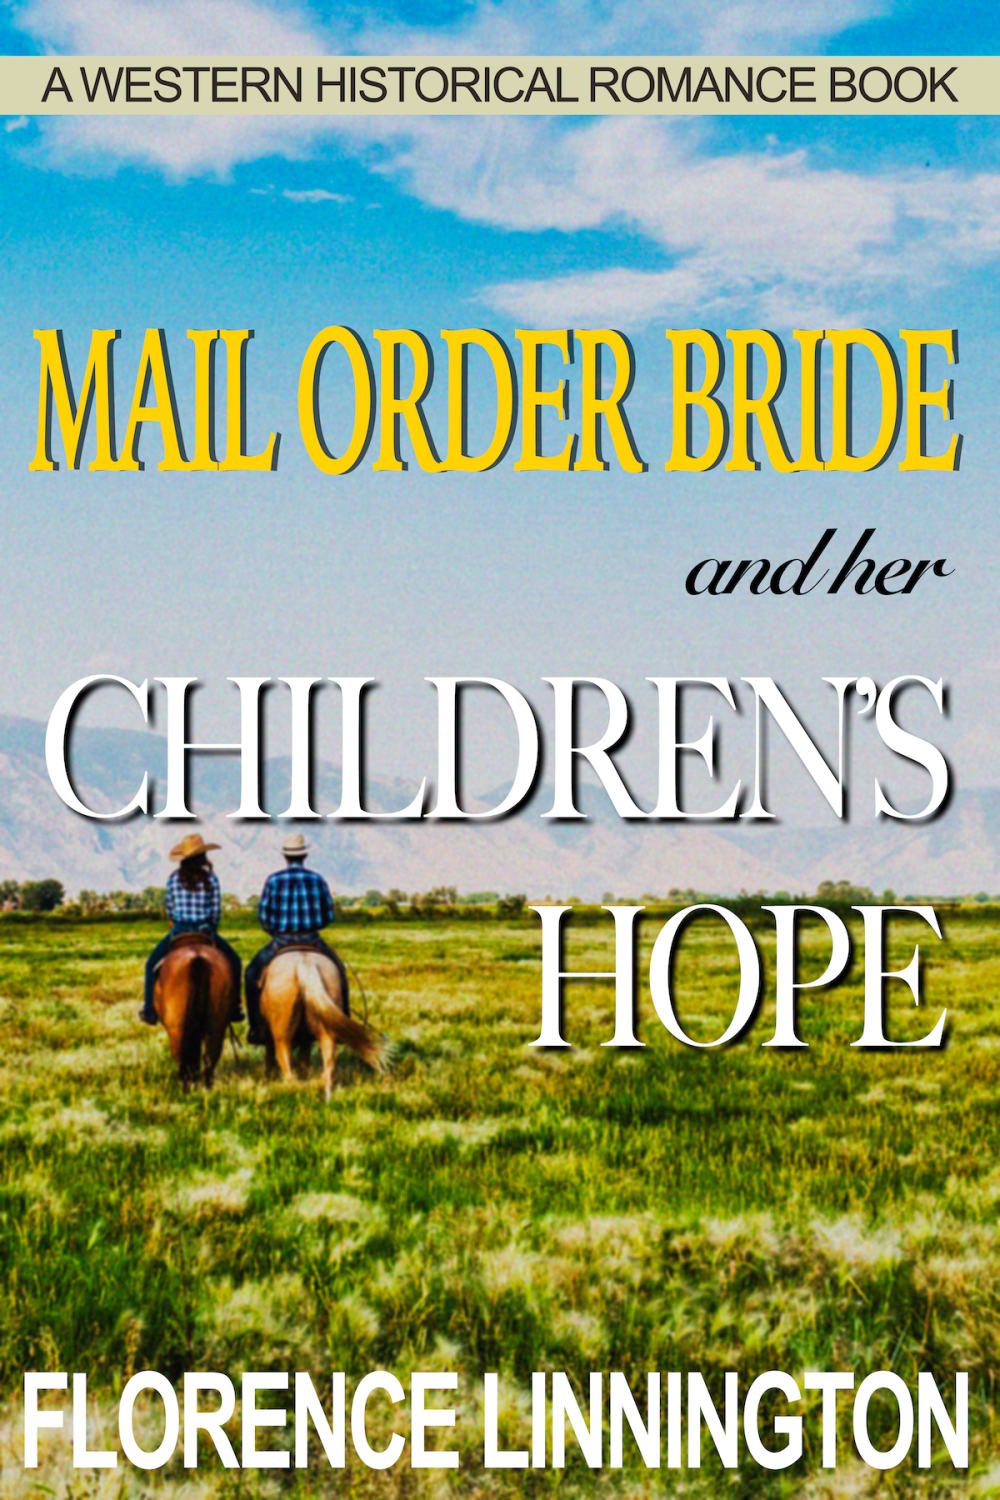 Mail Order Bride And Her Children's Hope (A Western Historical Romance Book)